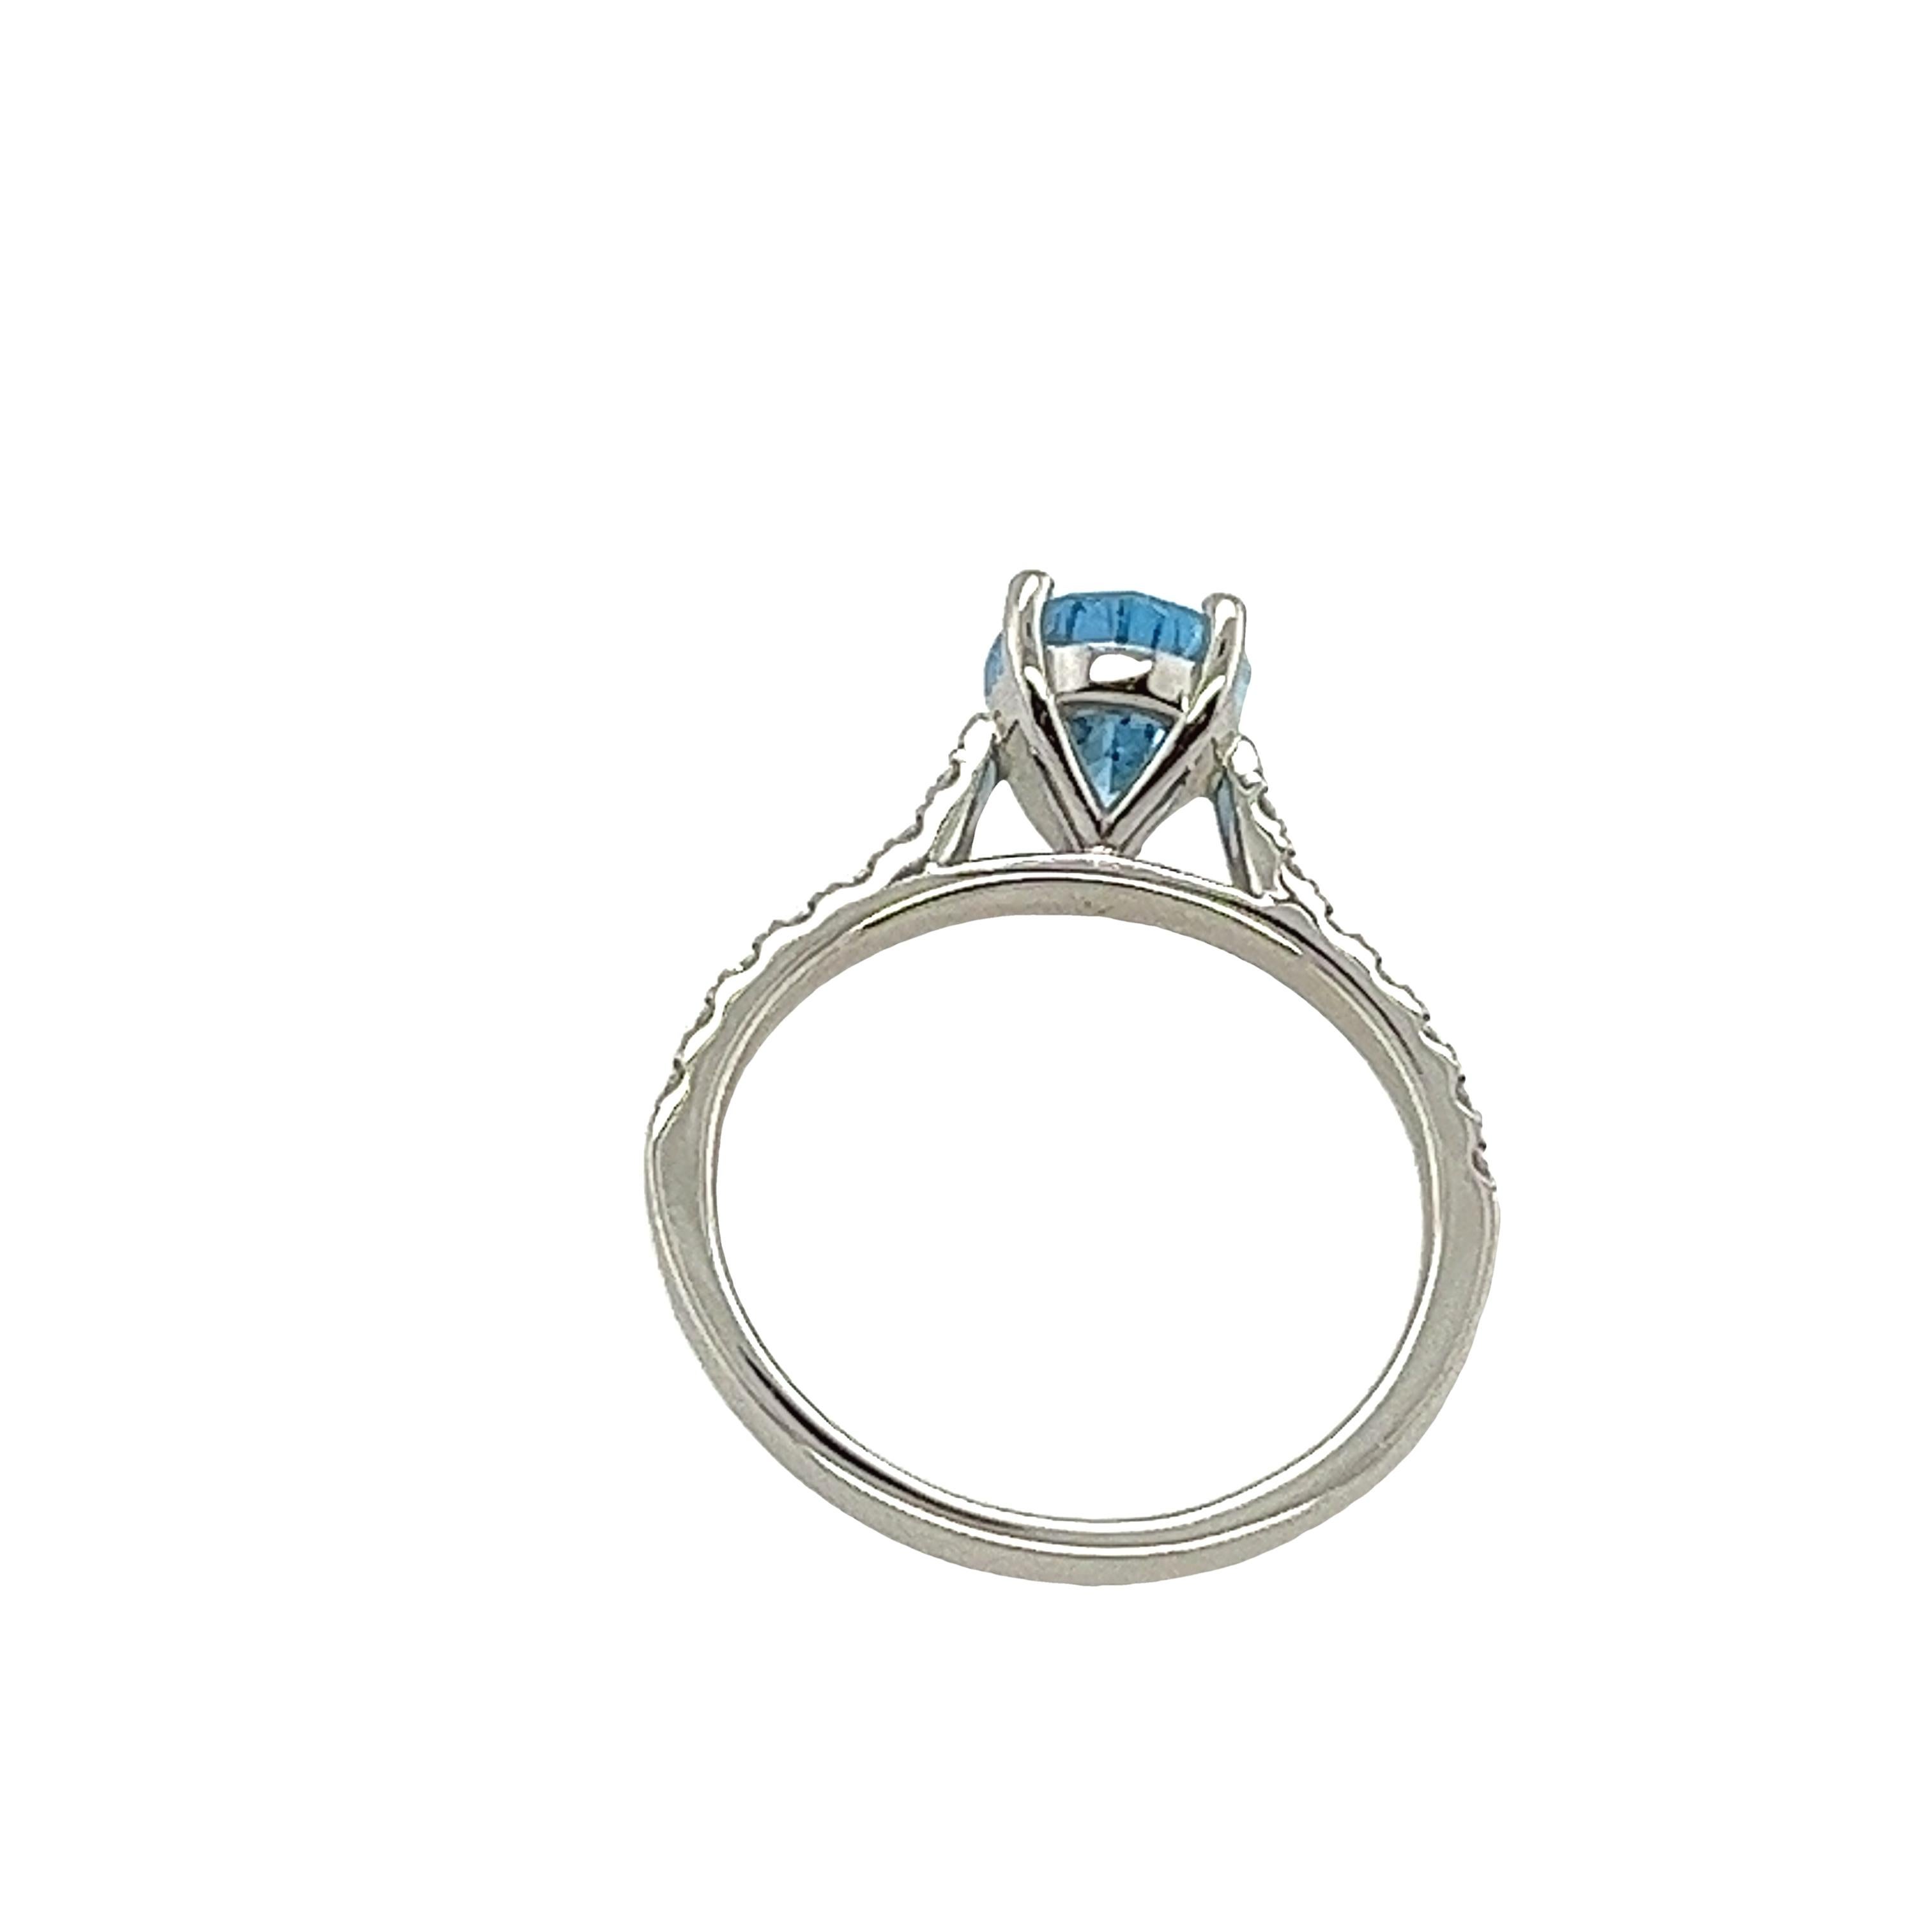 This gorgeous pear shape aquamarine ring is set in a platinum setting, with 0.22ct natural round brilliant cut diamonds on shoulders. This is a unique and eye-catching ring.
Total Diamond Weight: 0.22ct
Diamond Colour: G
Diamond Clarity: VS1
Total